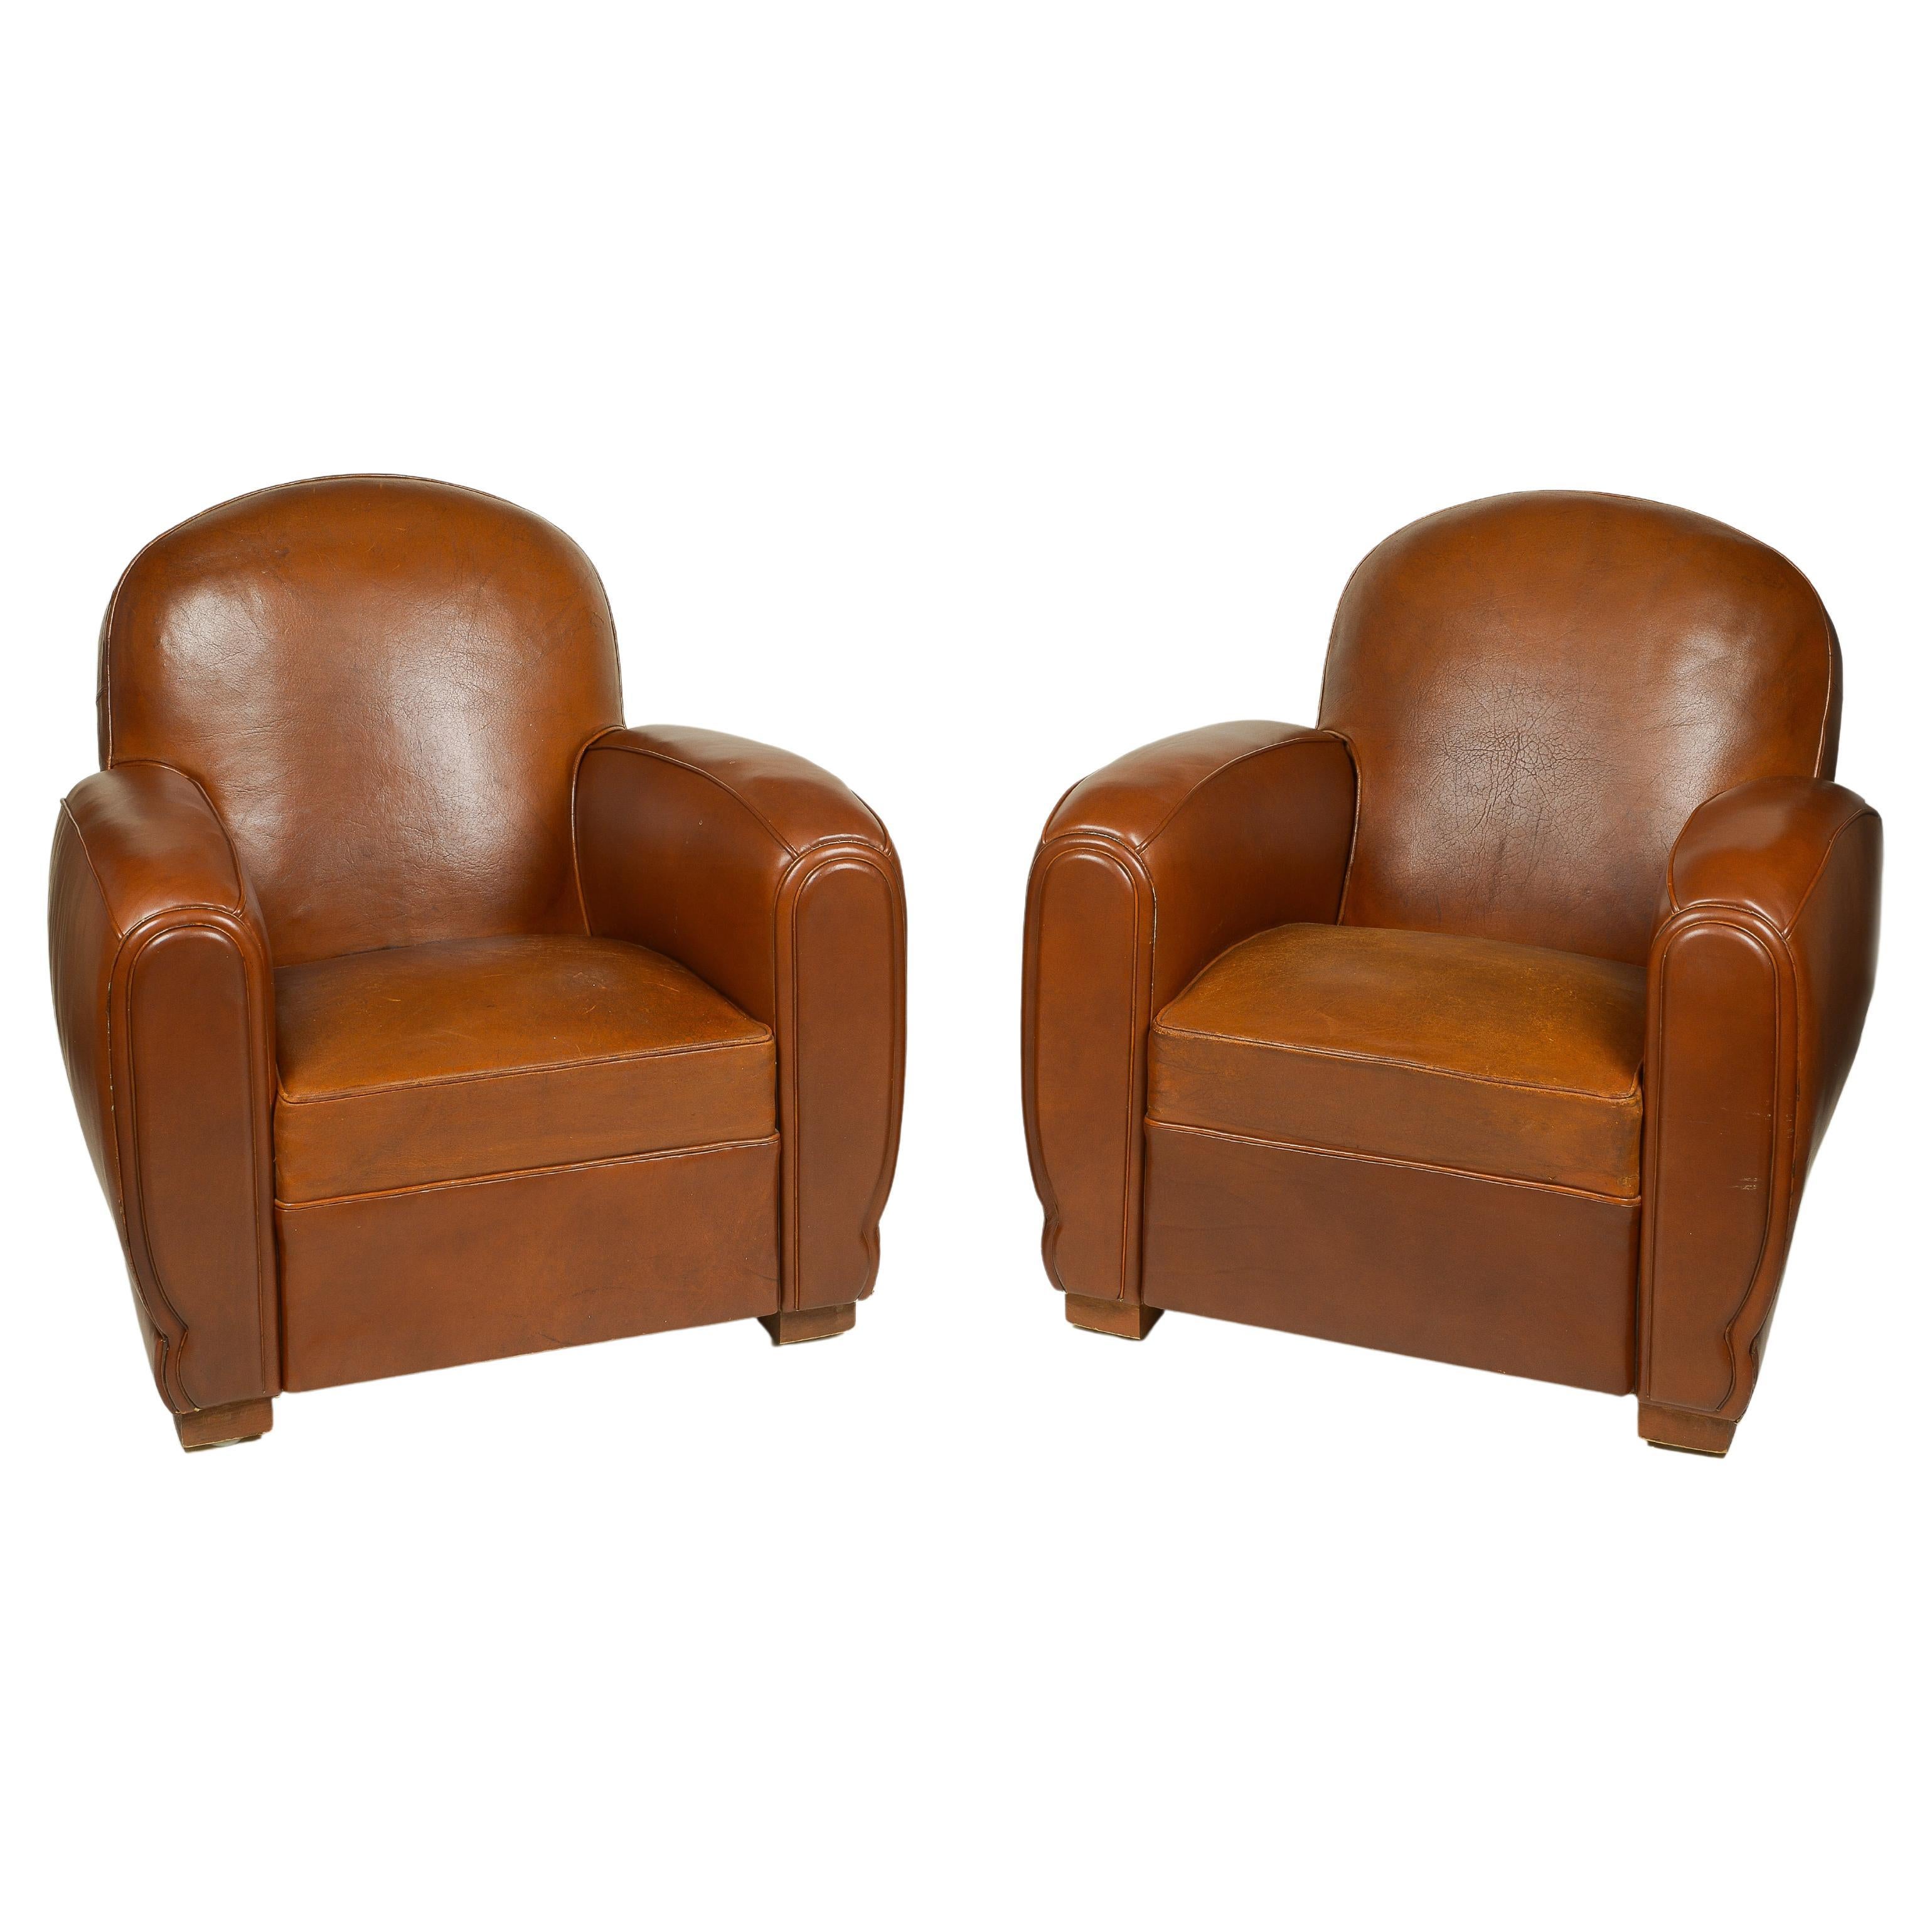 Pair of French Art Deco Brown Leather Club Chairs For Sale